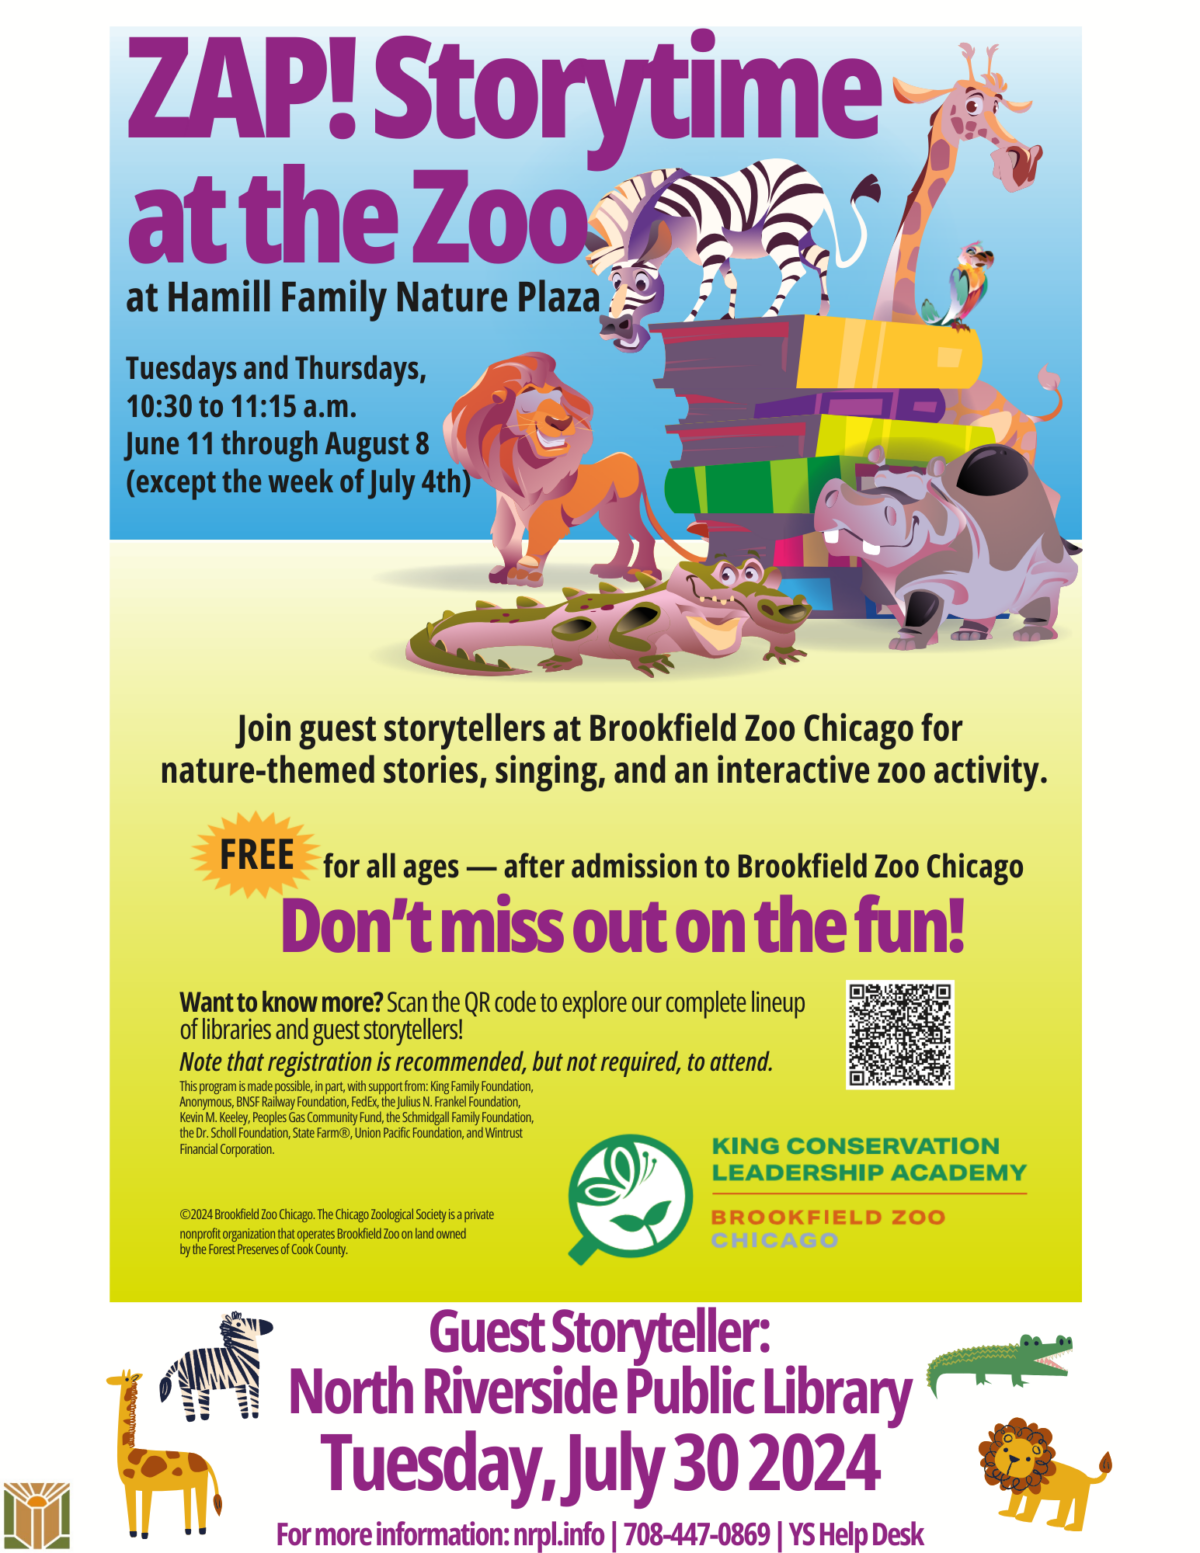 ZAP! Storytime at the Zoo at Hamill Family Nature Plaza Tuesdays and Thursdays, 10:30 to 11:15 a.m. June 11 through August 8 (except the week of July 4th). Join guest storytellers at Brookfield Zoo Chicago for nature-themed stories, singing, and an interactive zoo activity. Free for all ages — after admission to Brookfield Zoo Chicago. Don’t miss out on the fun! Want to know more? Scan the QR code to explore our complete lineup of libraries and guest storytellers! Note that registration is recommended, but not required, to attend. This program is made possible, in part, with support from: King Family Foundation, Anonymous, BNSF Railway Foundation, FedEx, the Julius N. Frankel Foundation, Kevin M. Keeley, Peoples Gas Community Fund, the Schmidgall Family Foundation, the Dr. Scholl Foundation, State Farm®, Union Pacific Foundation, and Wintrust Financial Corporation. King Conservation Leadership Academy. Brookfield Zoo Chicago. ©2024 Brookfield Zoo Chicago. The Chicago Zoological Society is a private nonprofit organization that operates Brookfield Zoo on land owned by the Forest Preserves of Cook County. Guest Storyteller: North Riverside Public Library Tuesday, July 30 2024. For more information: nrpl.info | 708-447-0869 | YS Help Desk